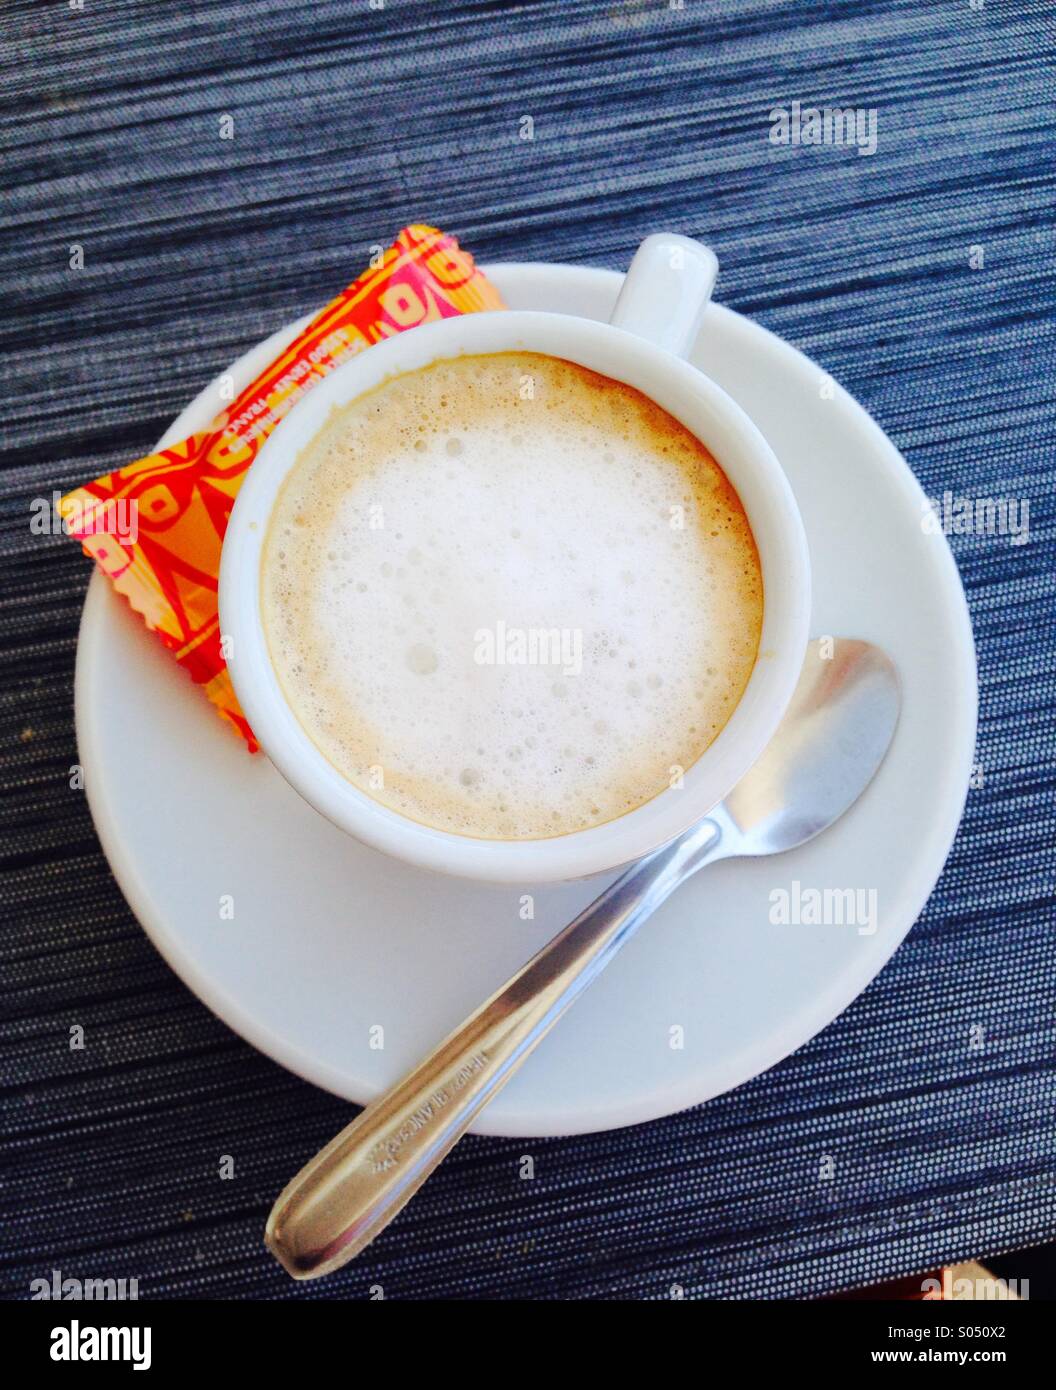 Coffee Cup and sugar packet.white coffee in white cup with spoon on white saucer and orange sugar packet. Stock Photo